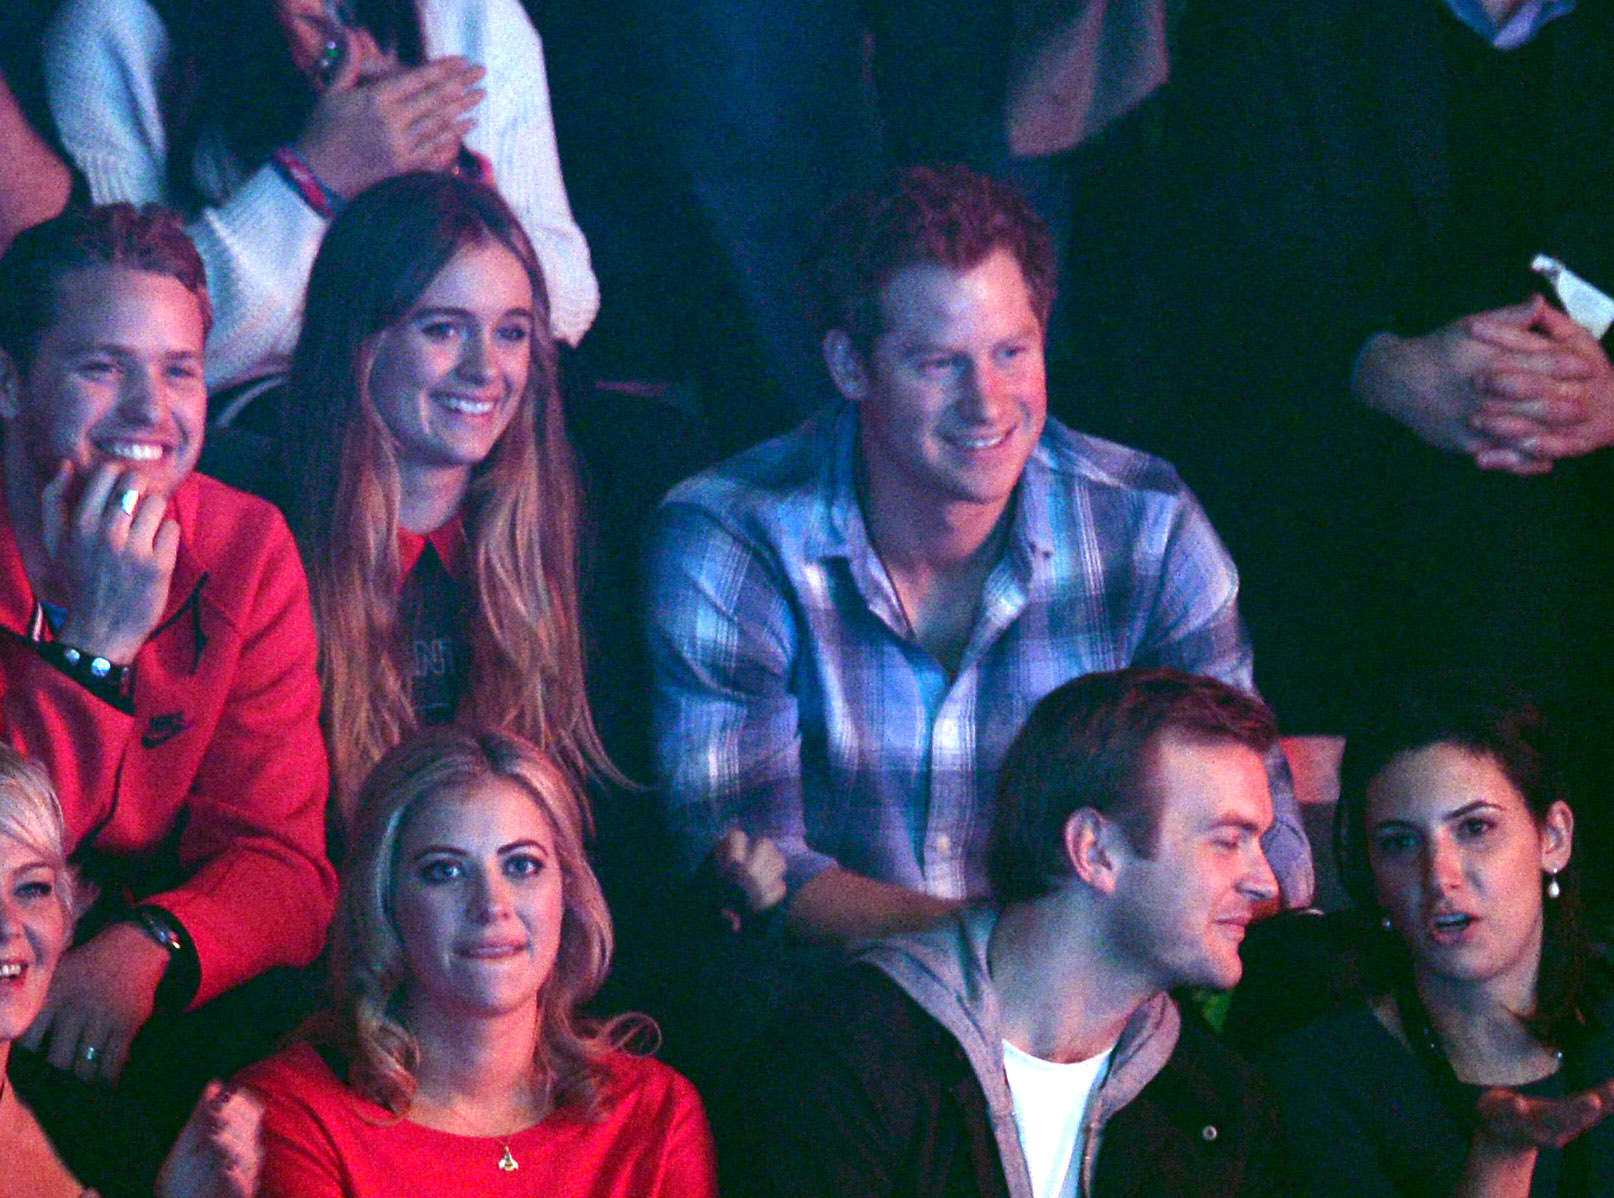 Cressida Bonas and Prince Harry attend We Day UK at Wembley Arena on March 7, 2014 in London, England. | Source: Getty Images